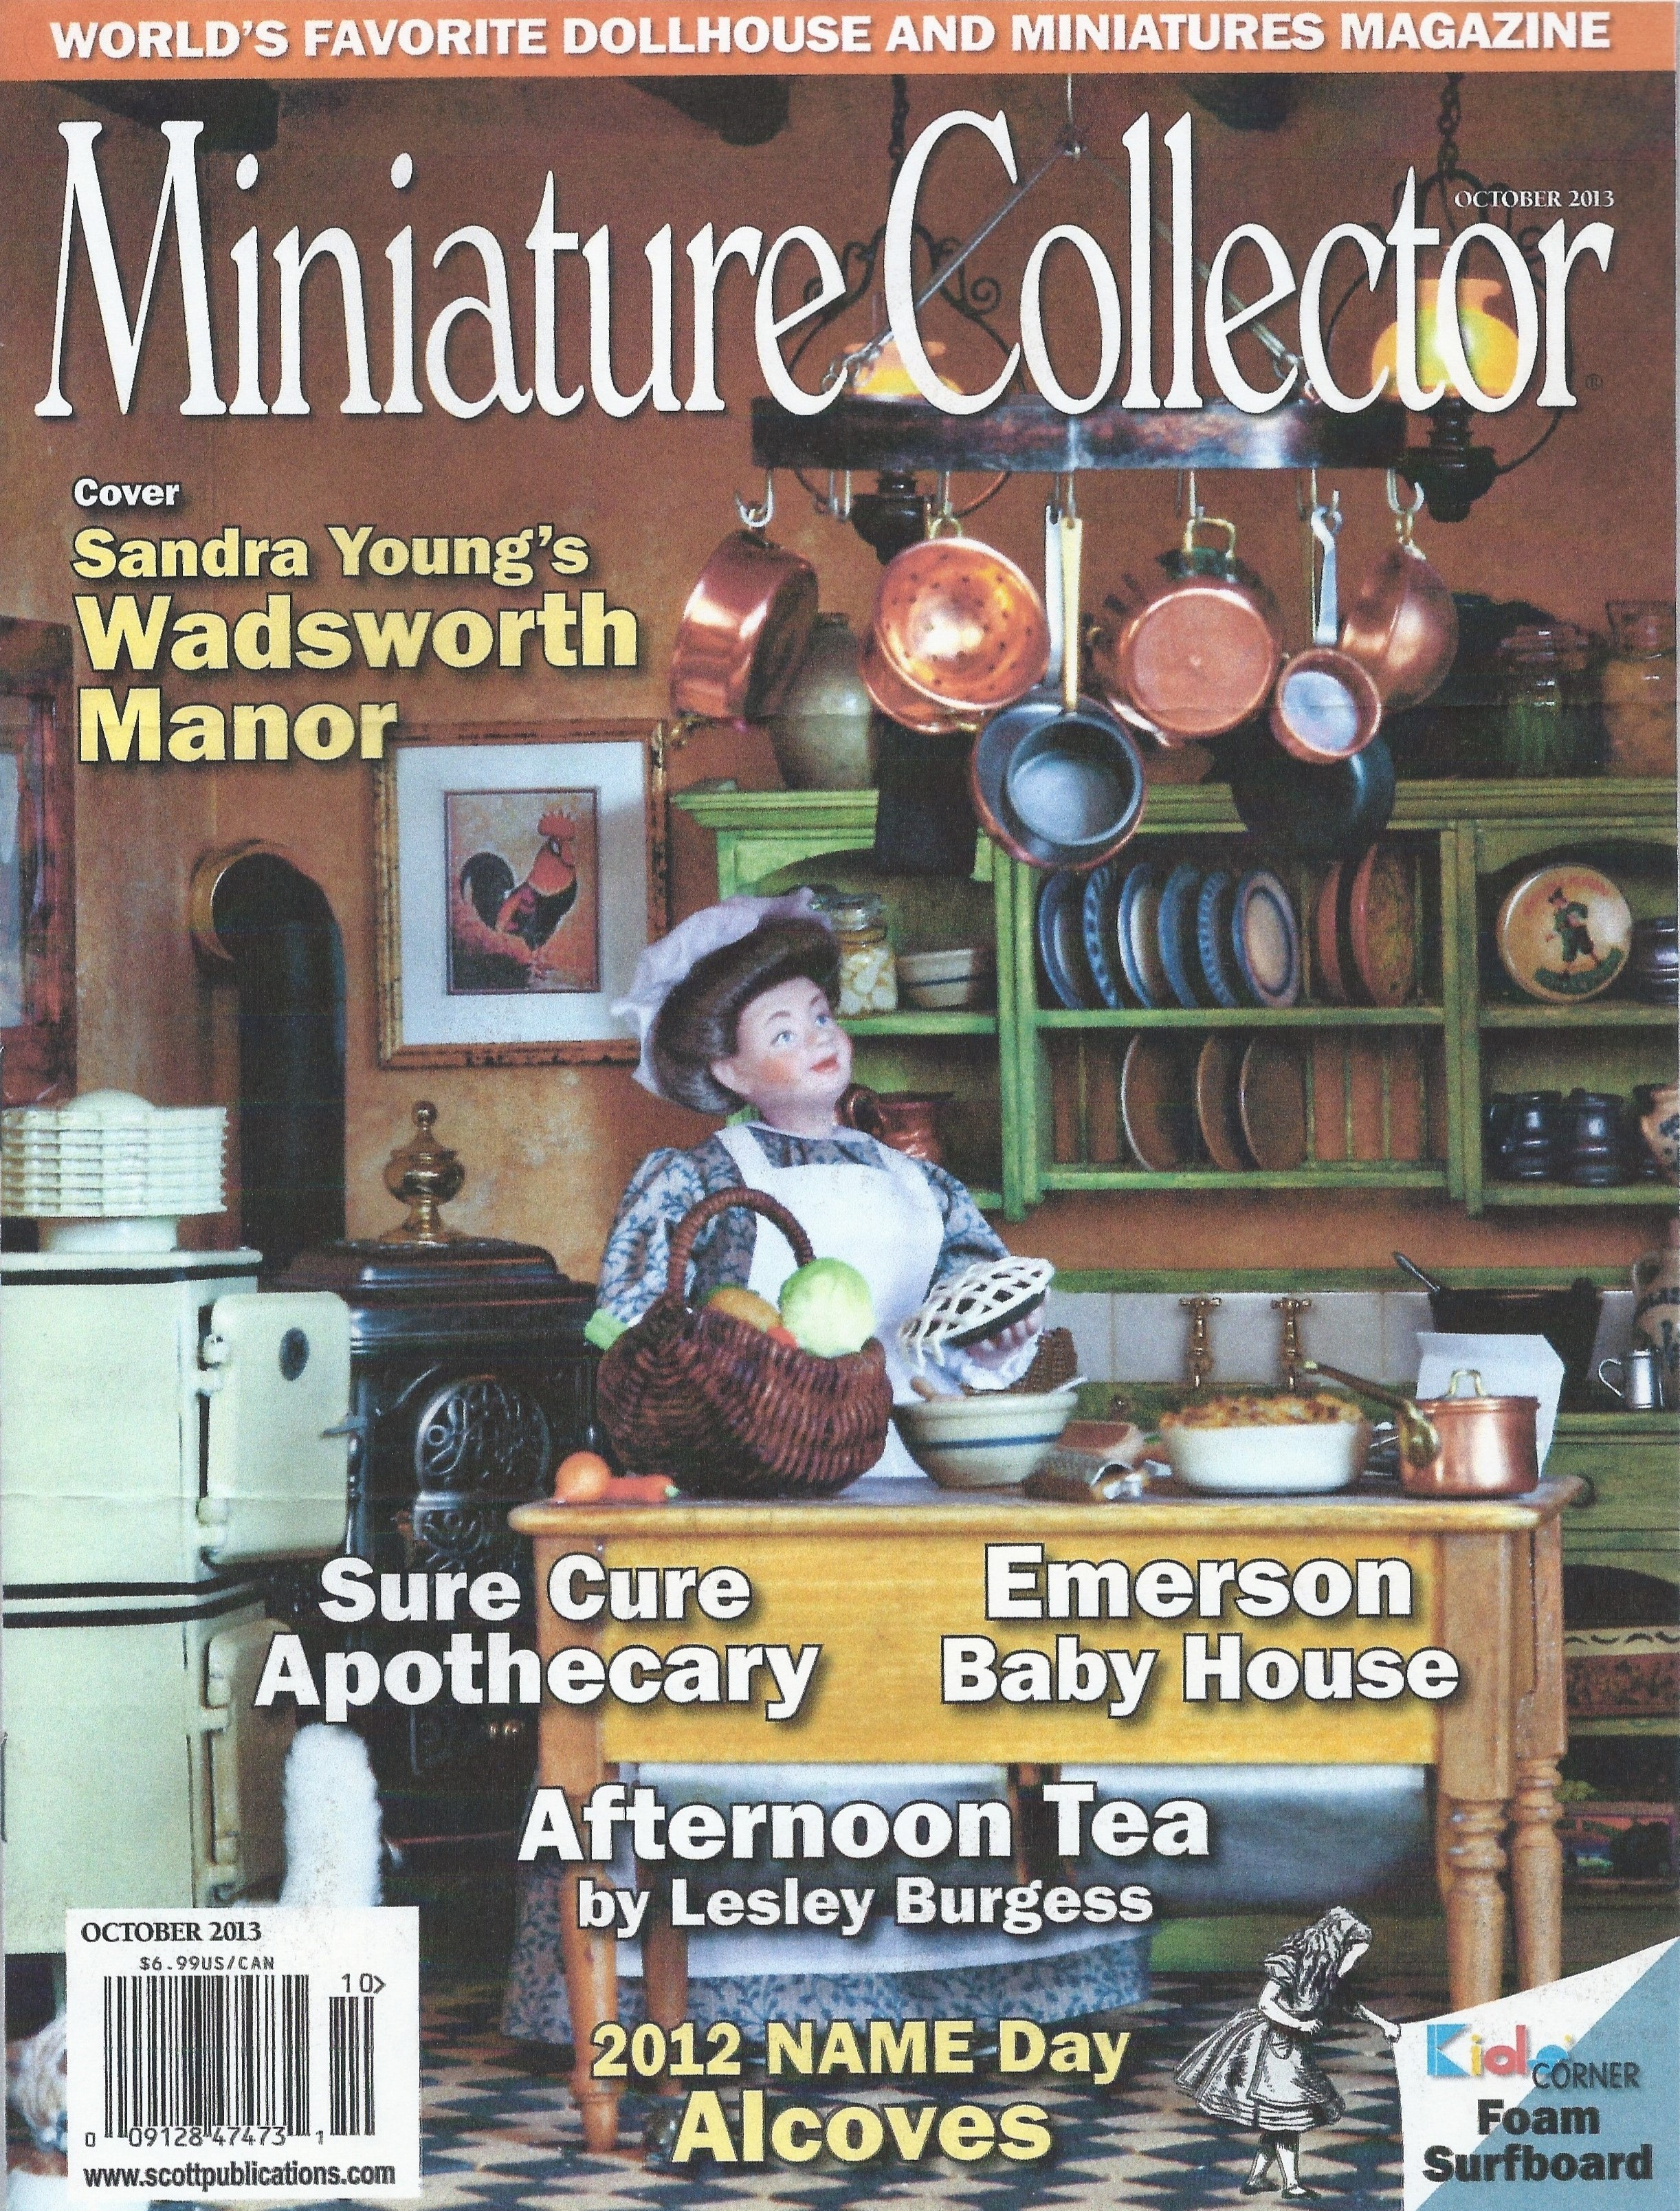 October 2013
Miniature Collector Magazine
featuring Sandra Young's
Wadsworth Manor